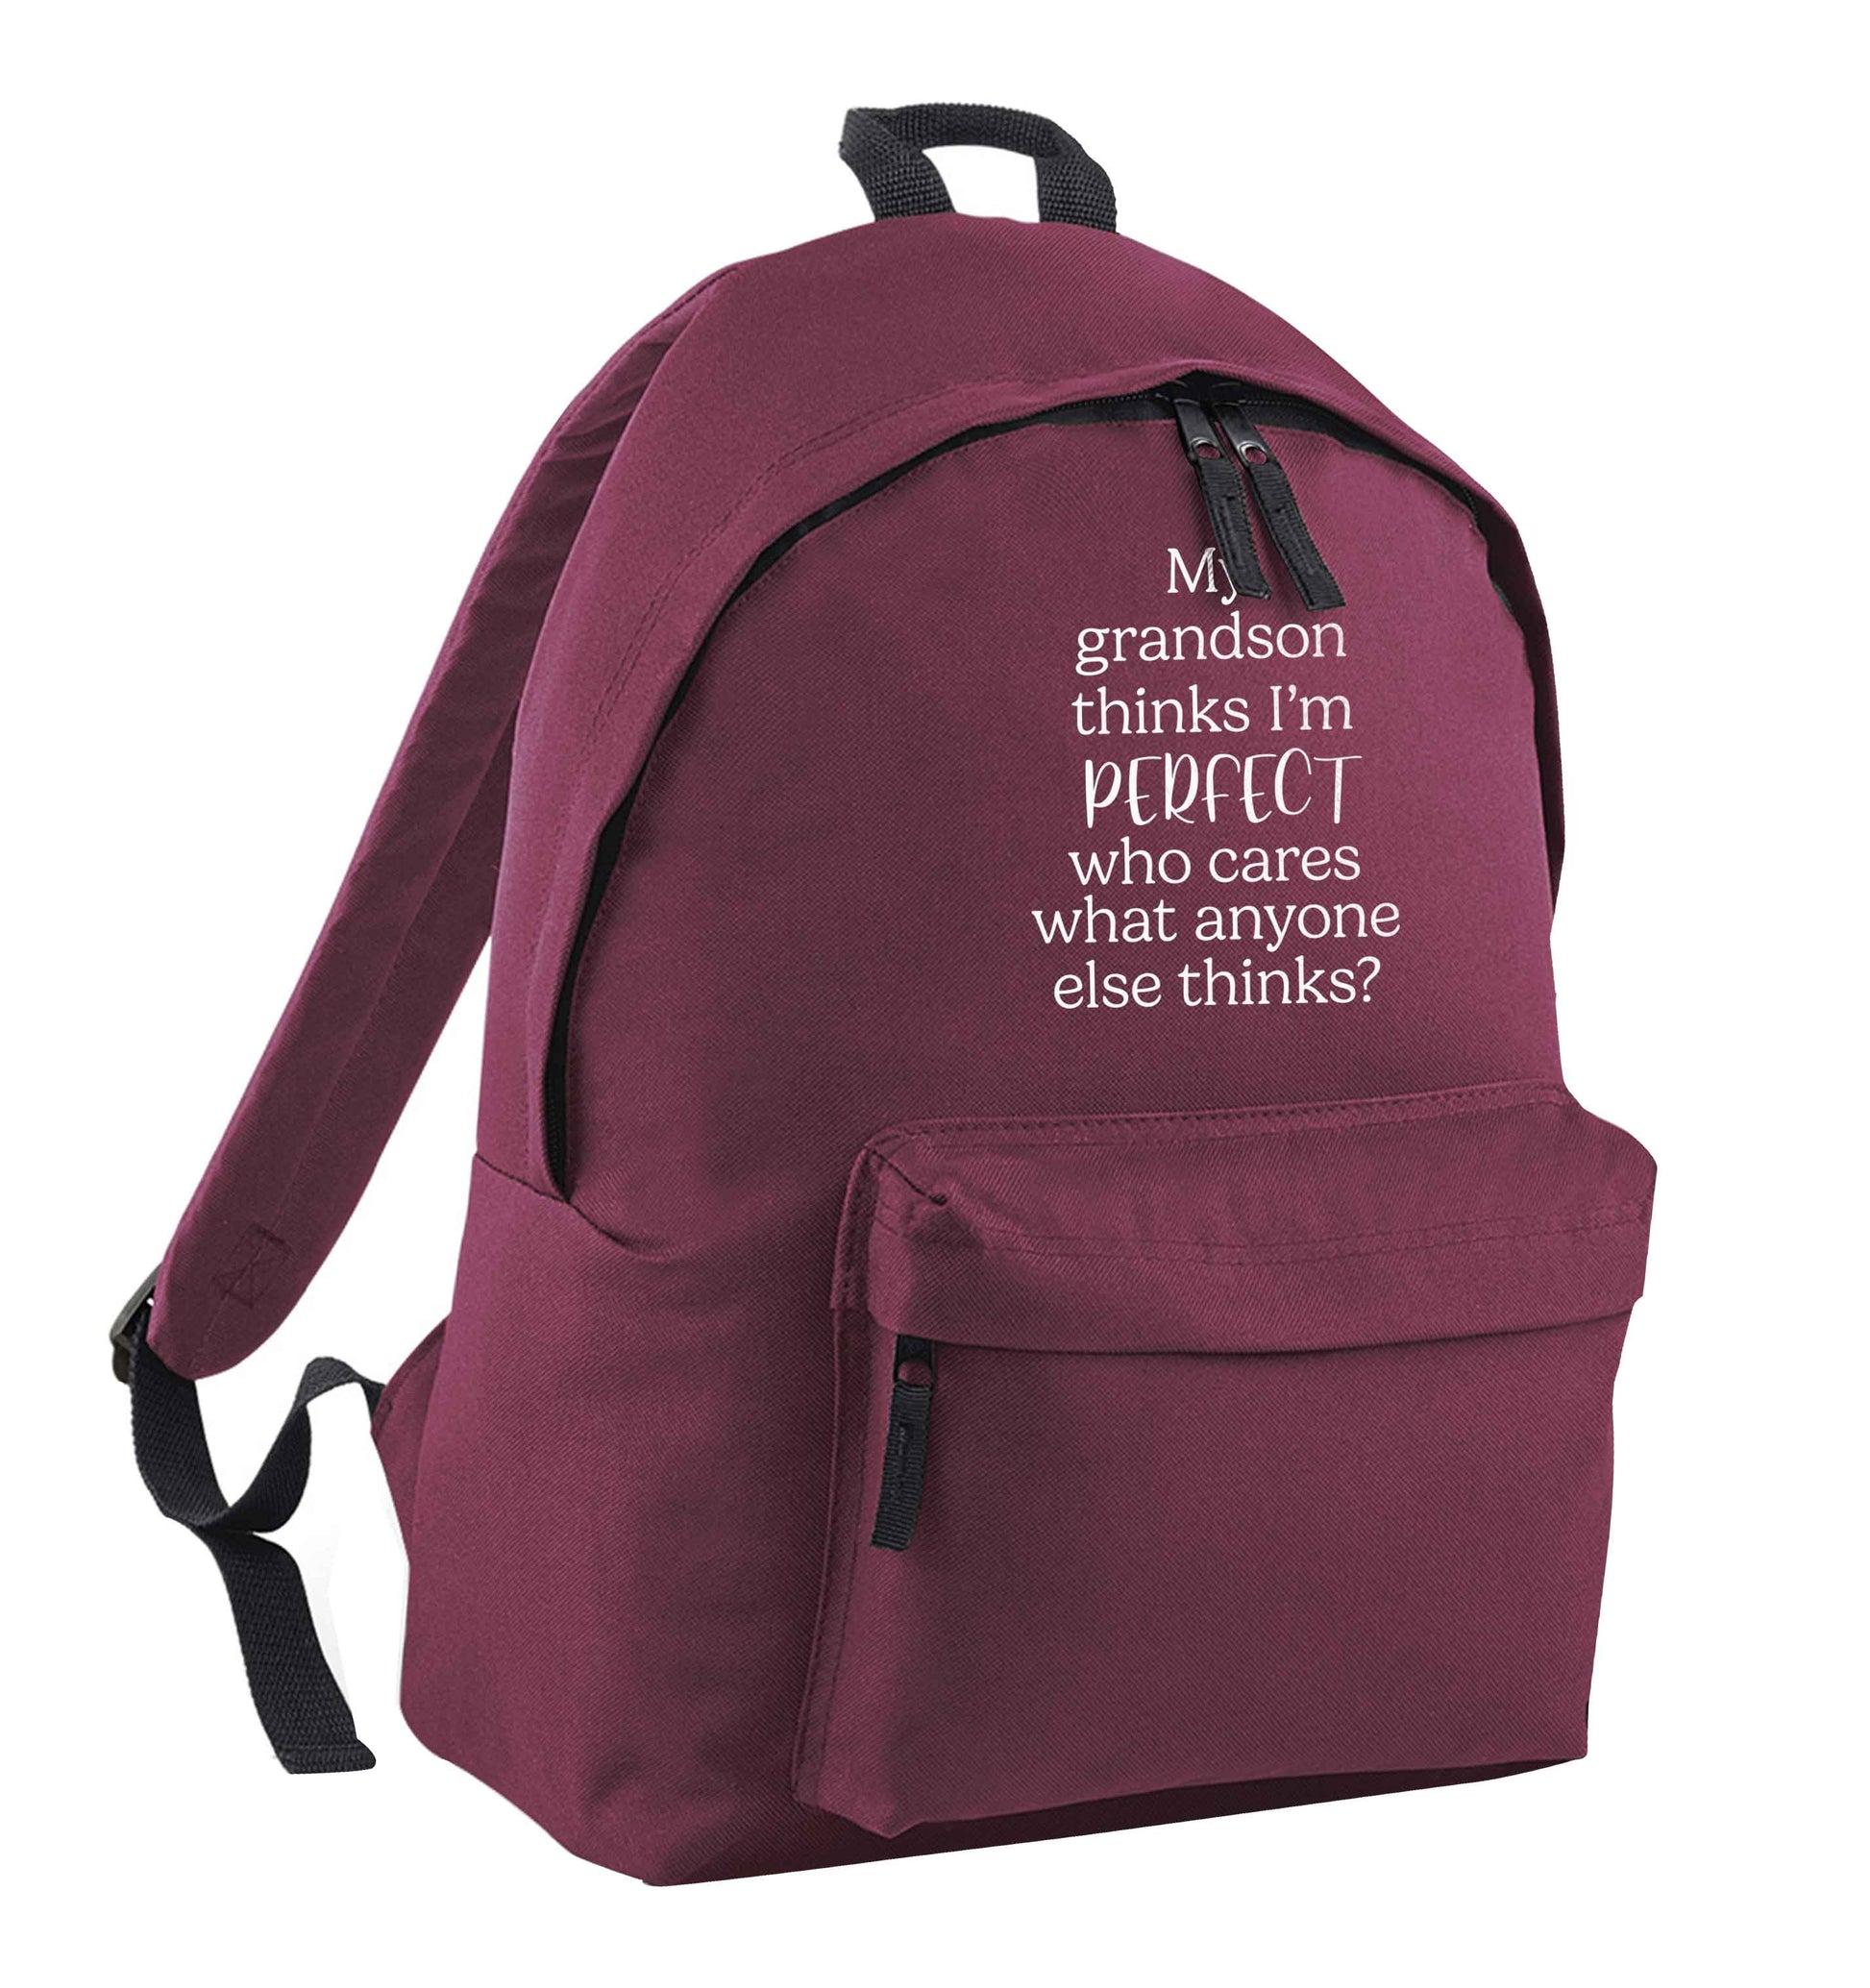 My grandson thinks I'm perfect maroon adults backpack